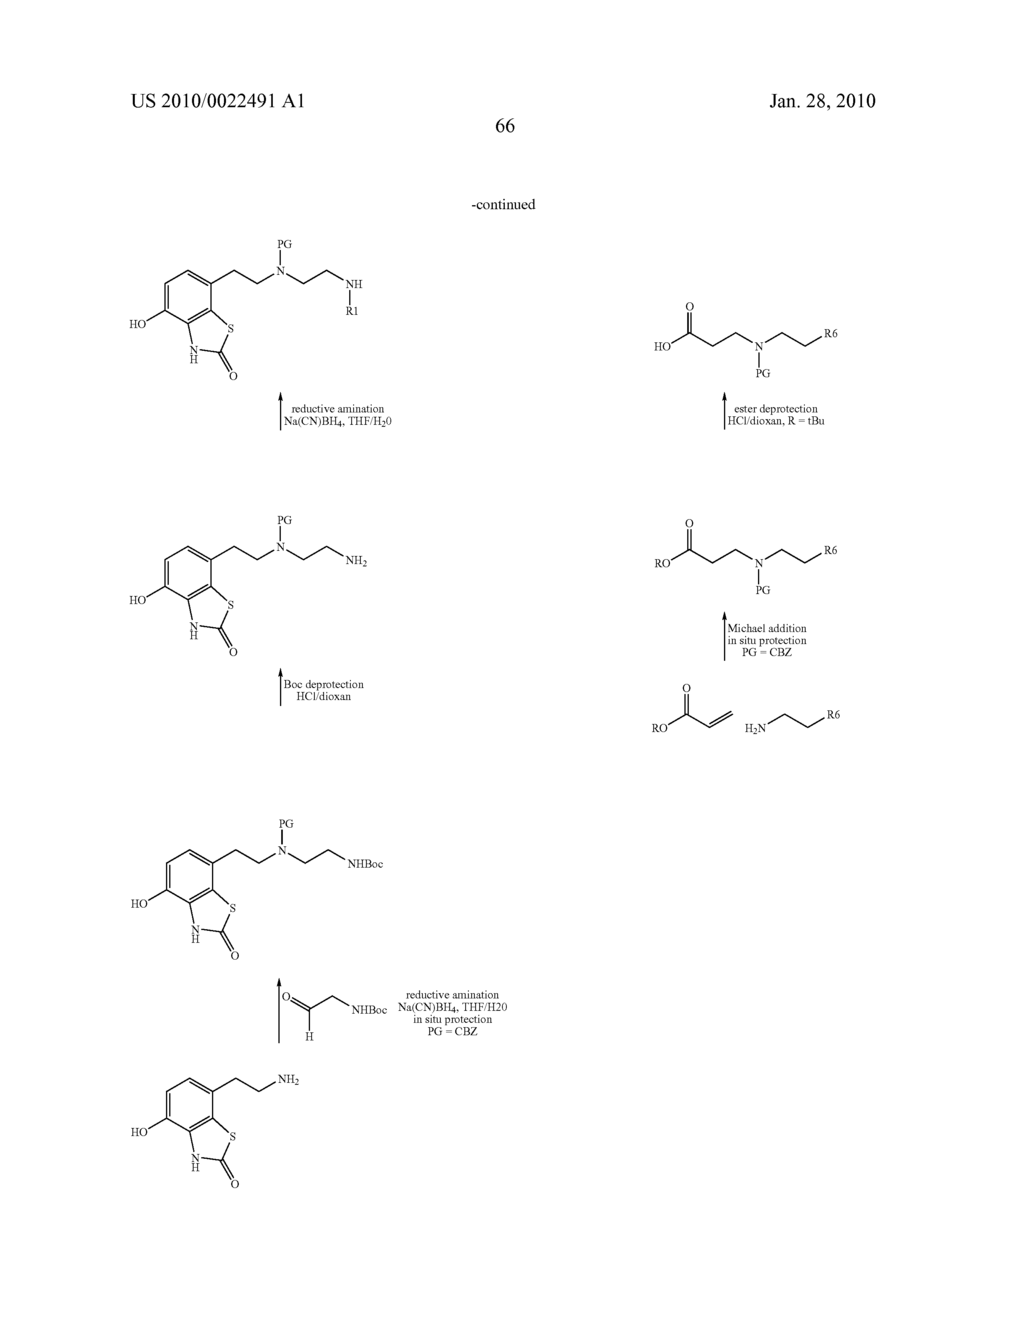 4-HYDROXY-2-OXO-2,3-DIHYDRO-1,3-BENZOTHIAZOL-7YL COMPOUNDS FOR MODULATION OF B2-ADRENORECEPTOR ACTIVITY - diagram, schematic, and image 67